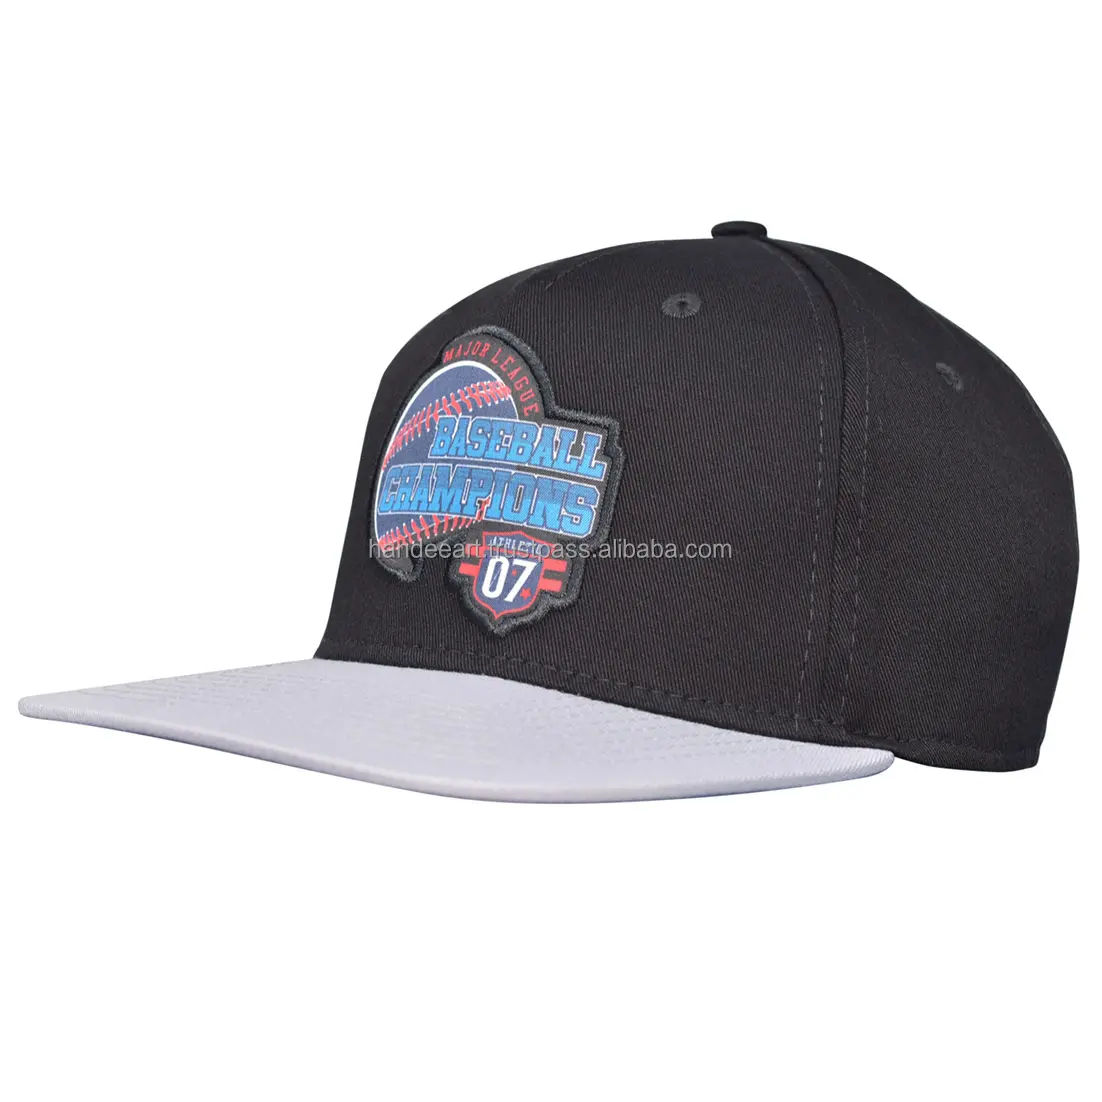 2023 Promotional Dongguan custom 6 panel baseball trucker cap with embroidery American flag solf mesh running golf sports hat